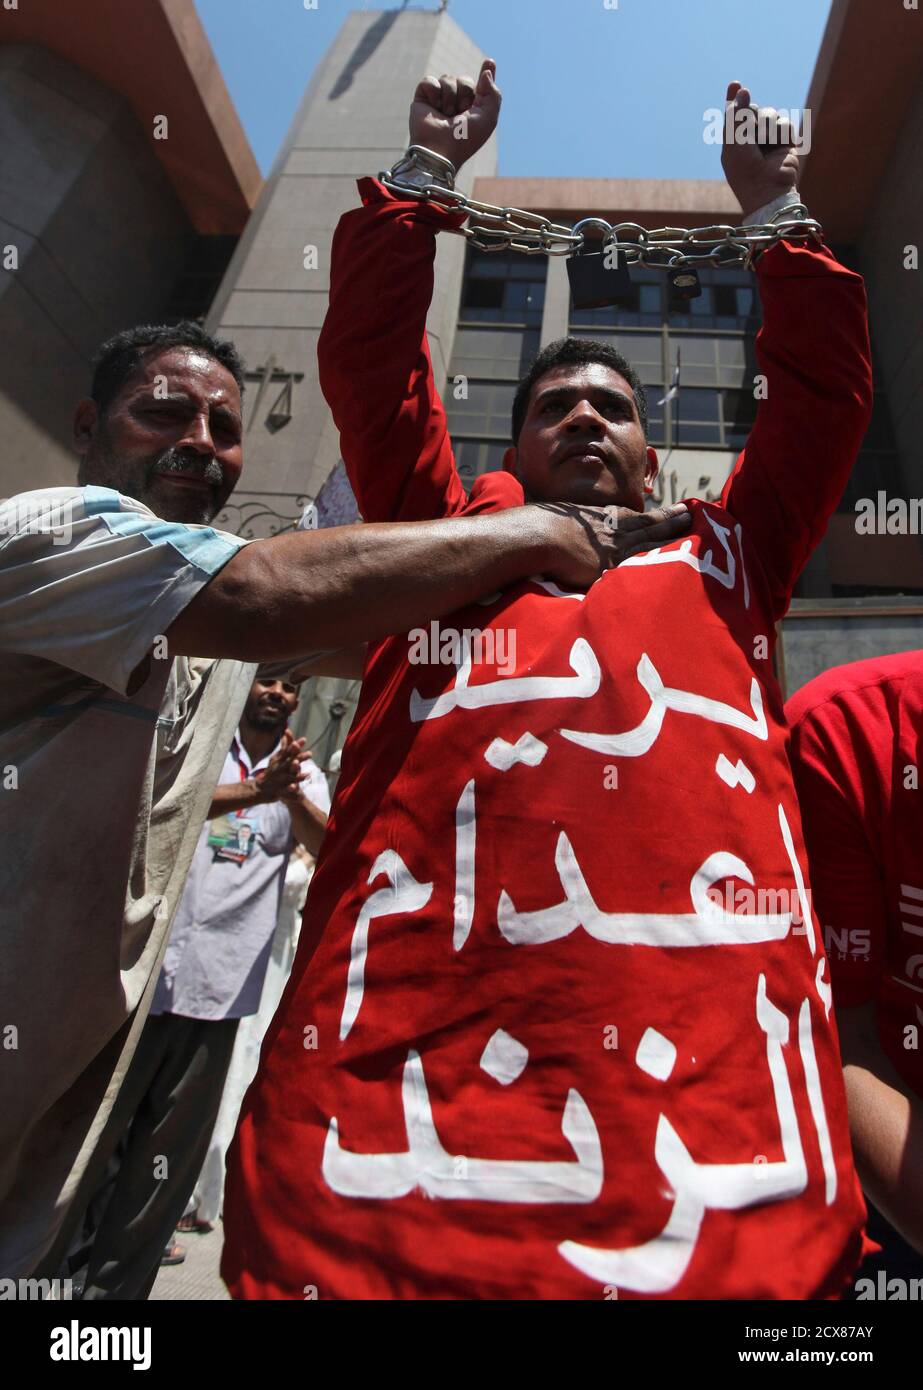 A supporter of Egypt's first Islamist President Mohamed Mursi is dressed in  a red attire and has his hands in chains and locks during a protest against  military rules and members of